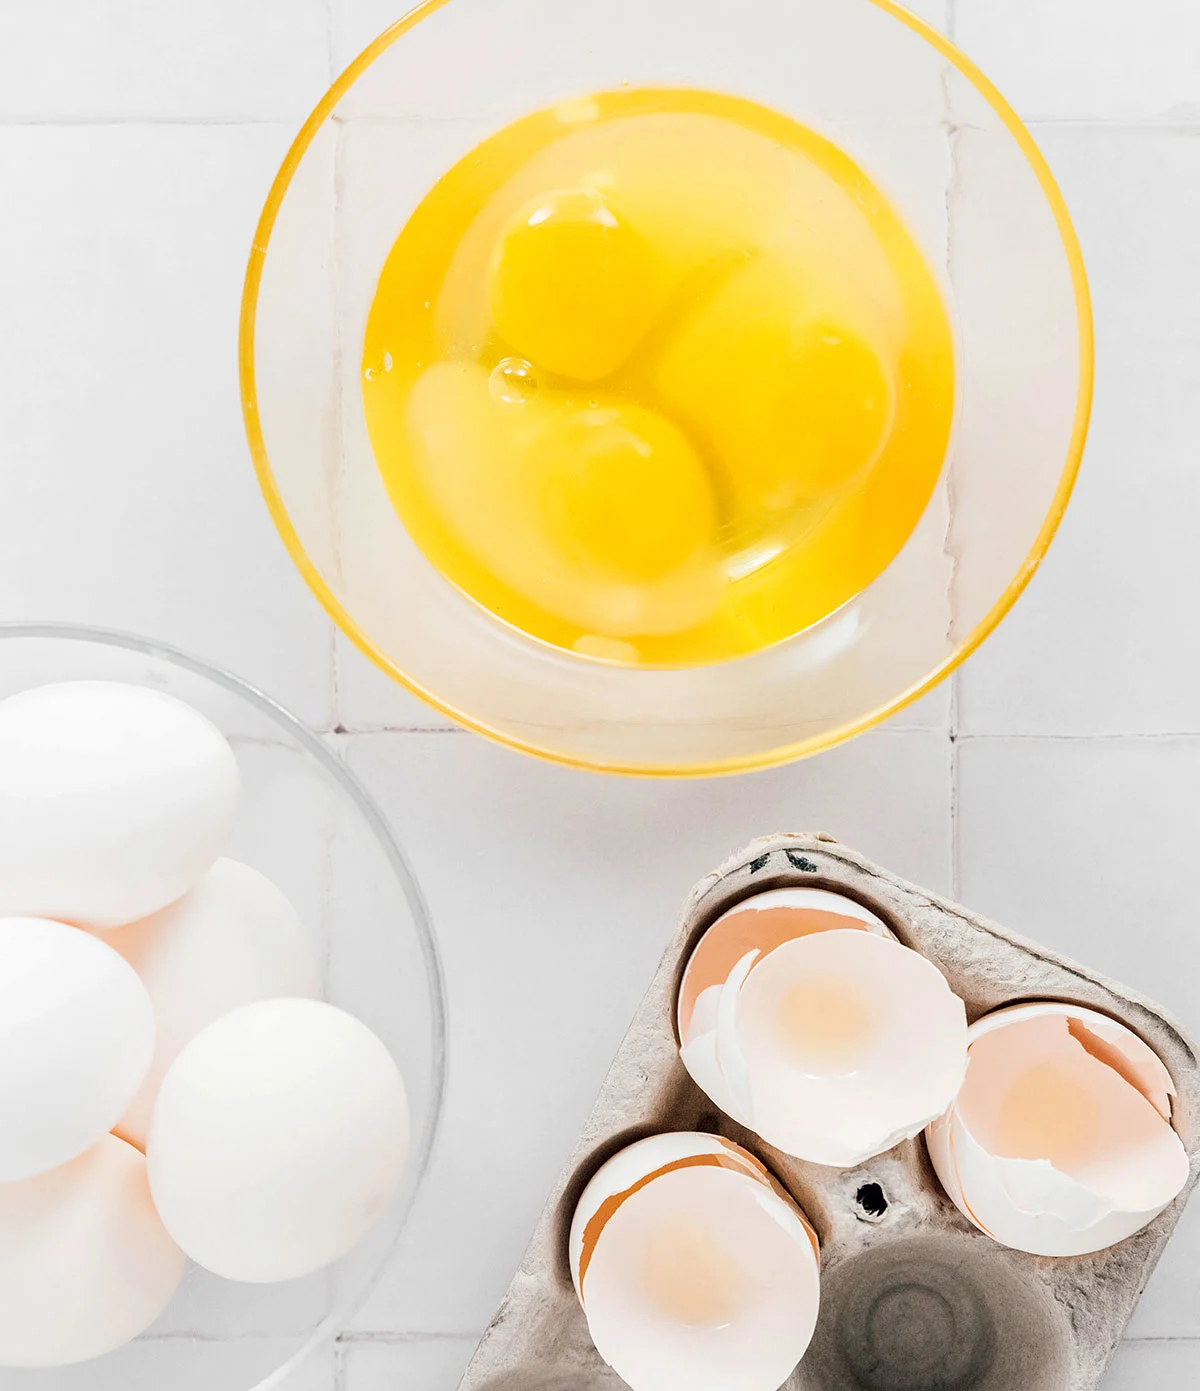 Egg yolks and whites in a bowl next to shells